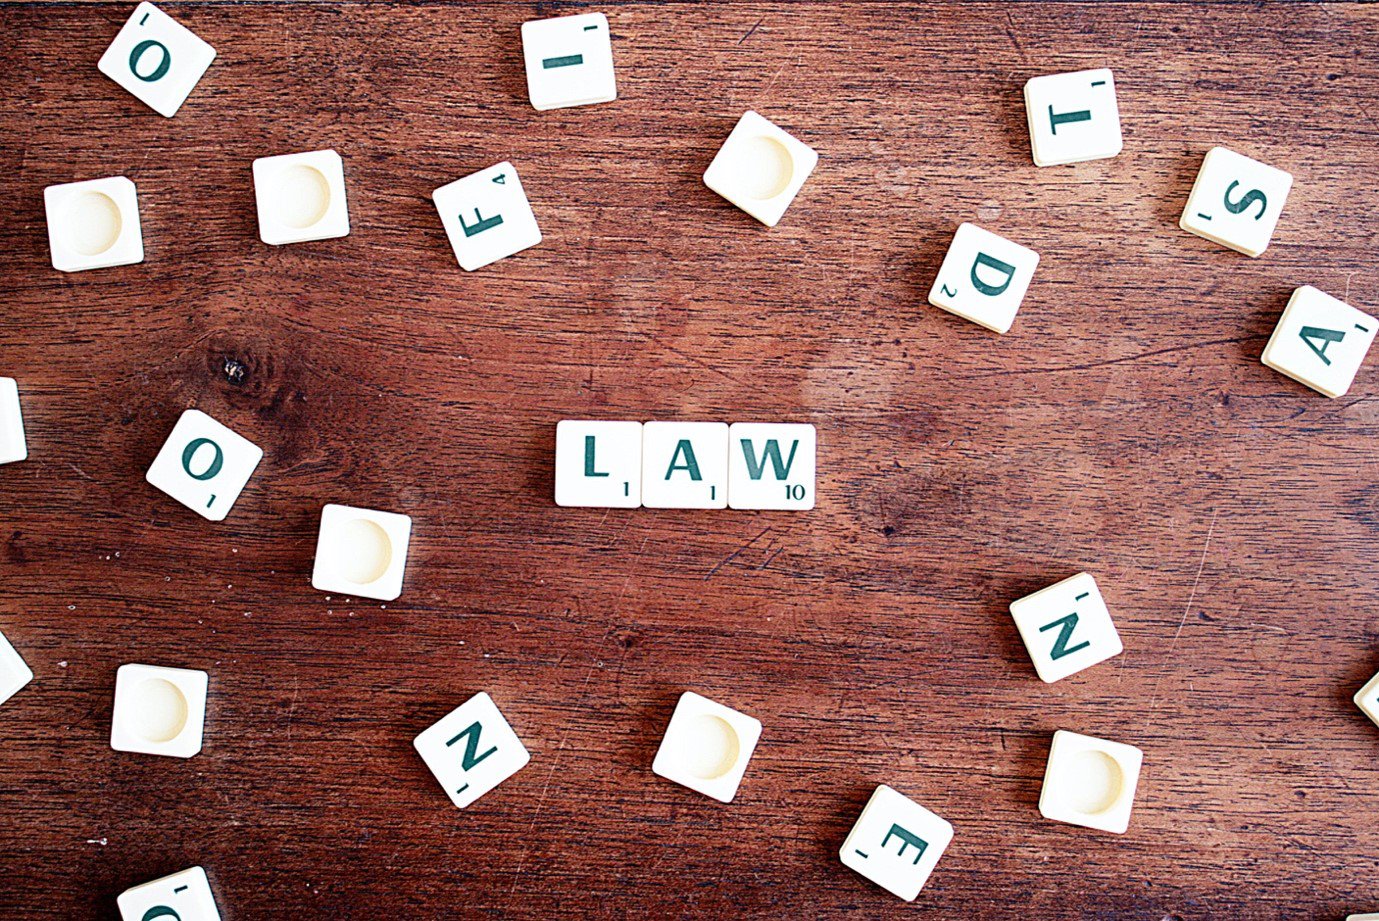 scattered scrabble tiles spelling out LAW